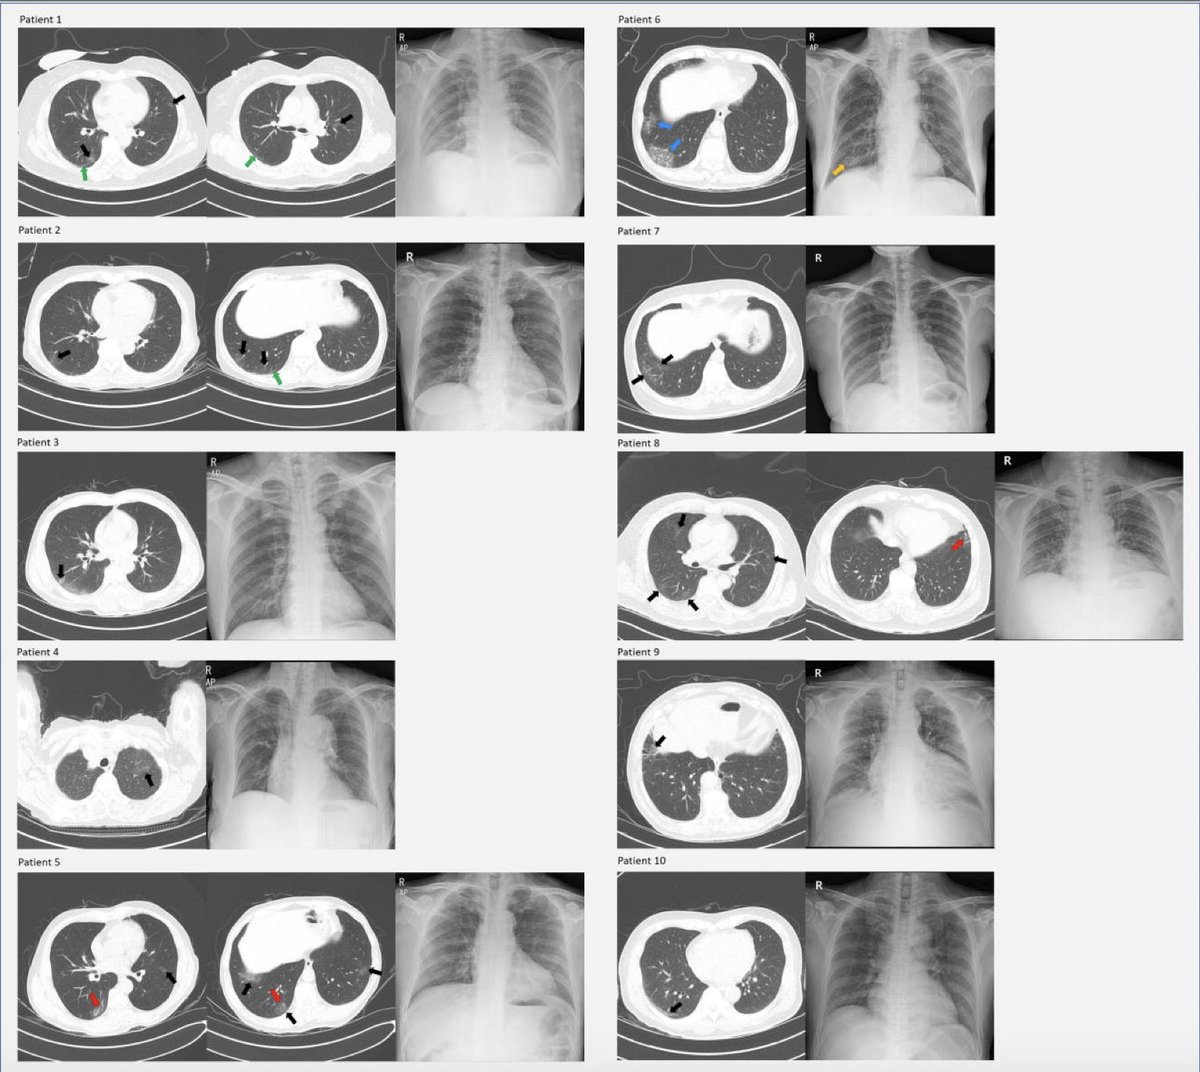 4. There are now 3 series of lung CT scans in people who were asymptomatic. More than half of these patients show distinct GGO abnormalities consistent w/  #COVID19 https://www.thelancet.com/journals/laninf/article/PIIS1473-3099(20)30364-9/fulltext https://www.thelancet.com/journals/laninf/article/PIIS1473-3099(20)30482-5/fulltext https://www.medrxiv.org/content/10.1101/2020.05.09.20096370v1.full.pdf